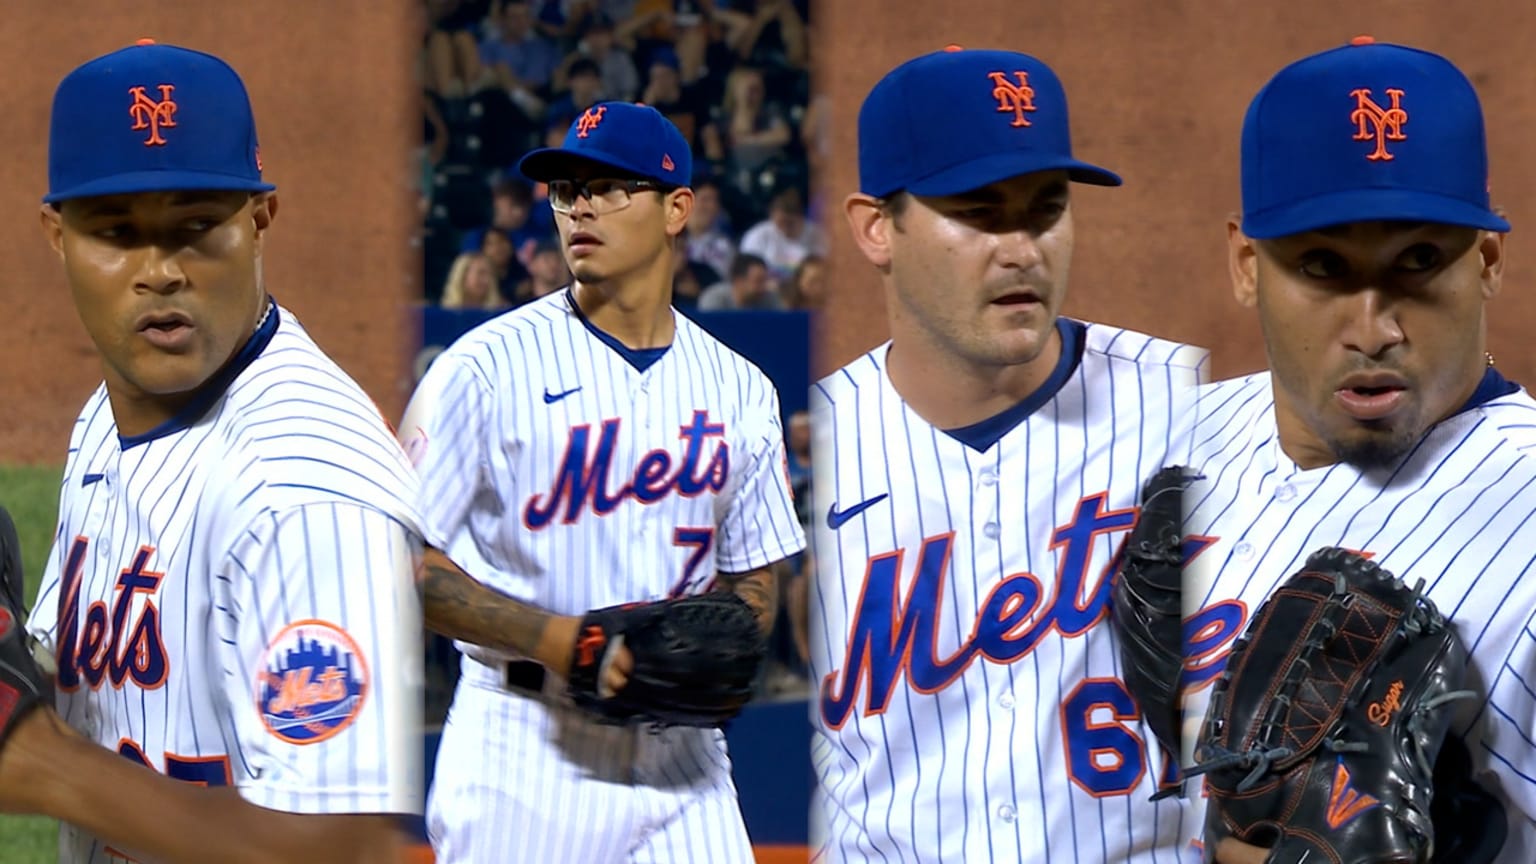 After Maine Departs Early, the Mets' Bullpen Falters Late - The